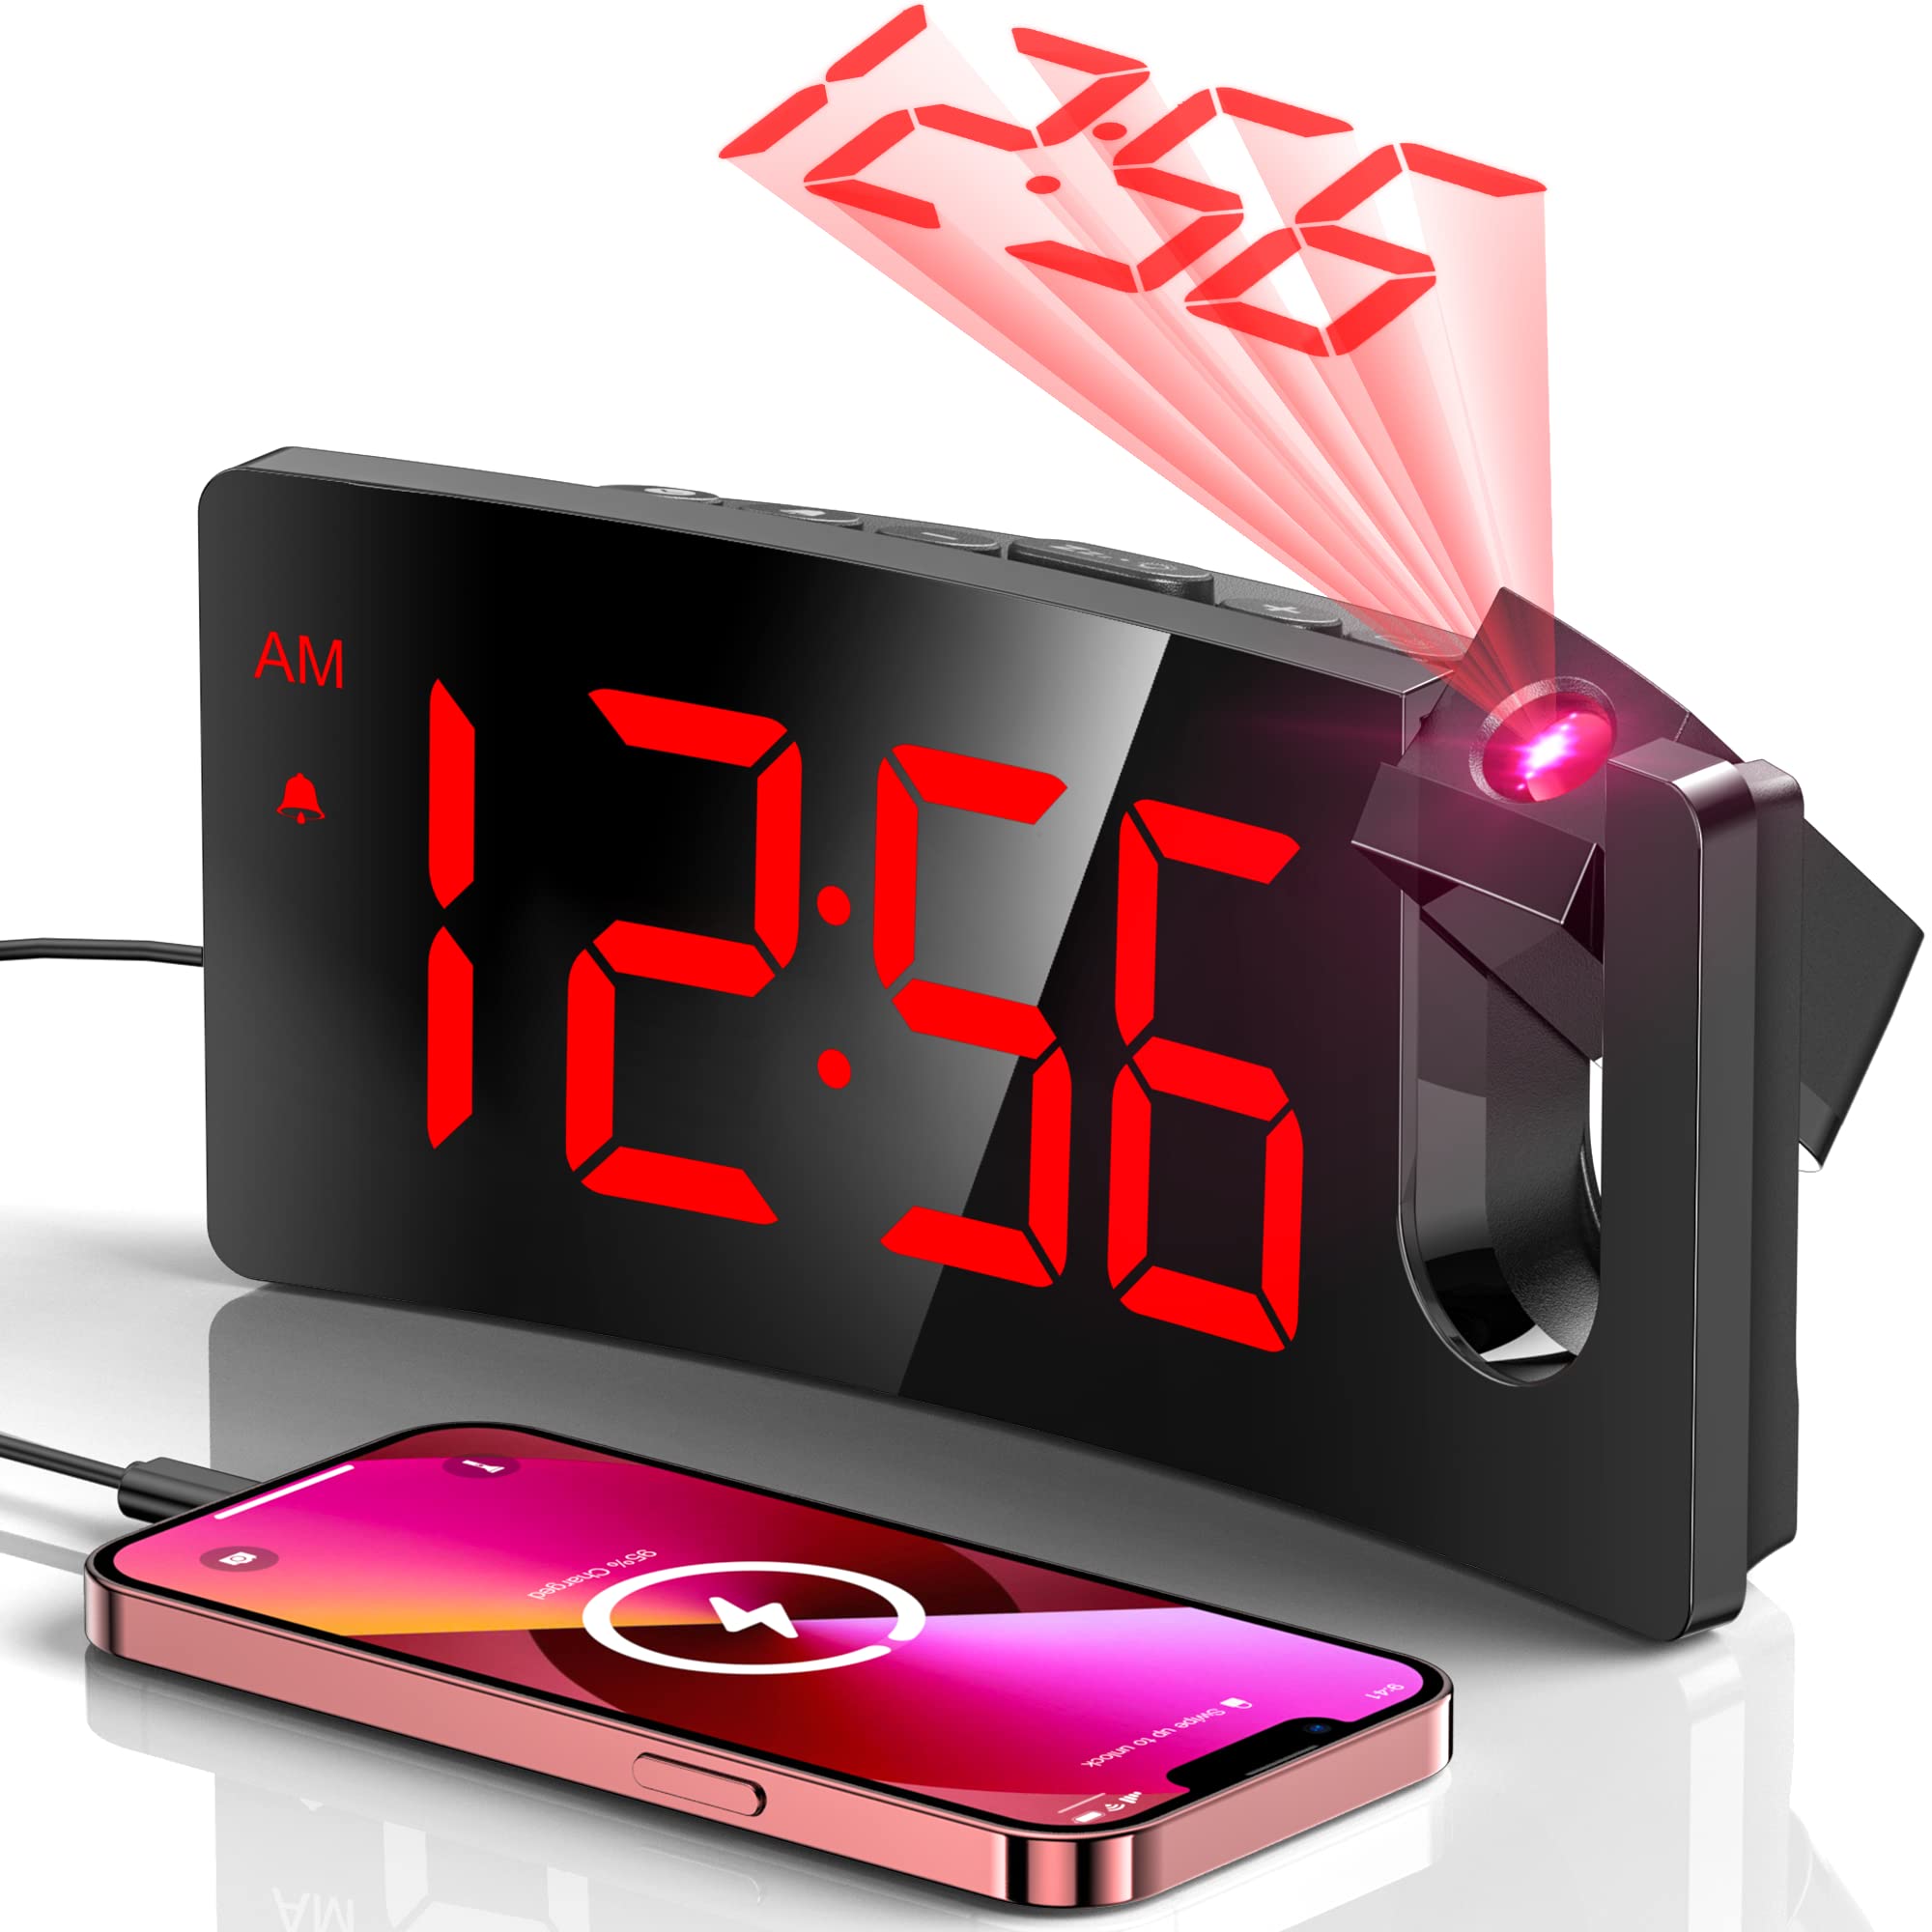 12 Best Alarm Clock With Projection for 2023